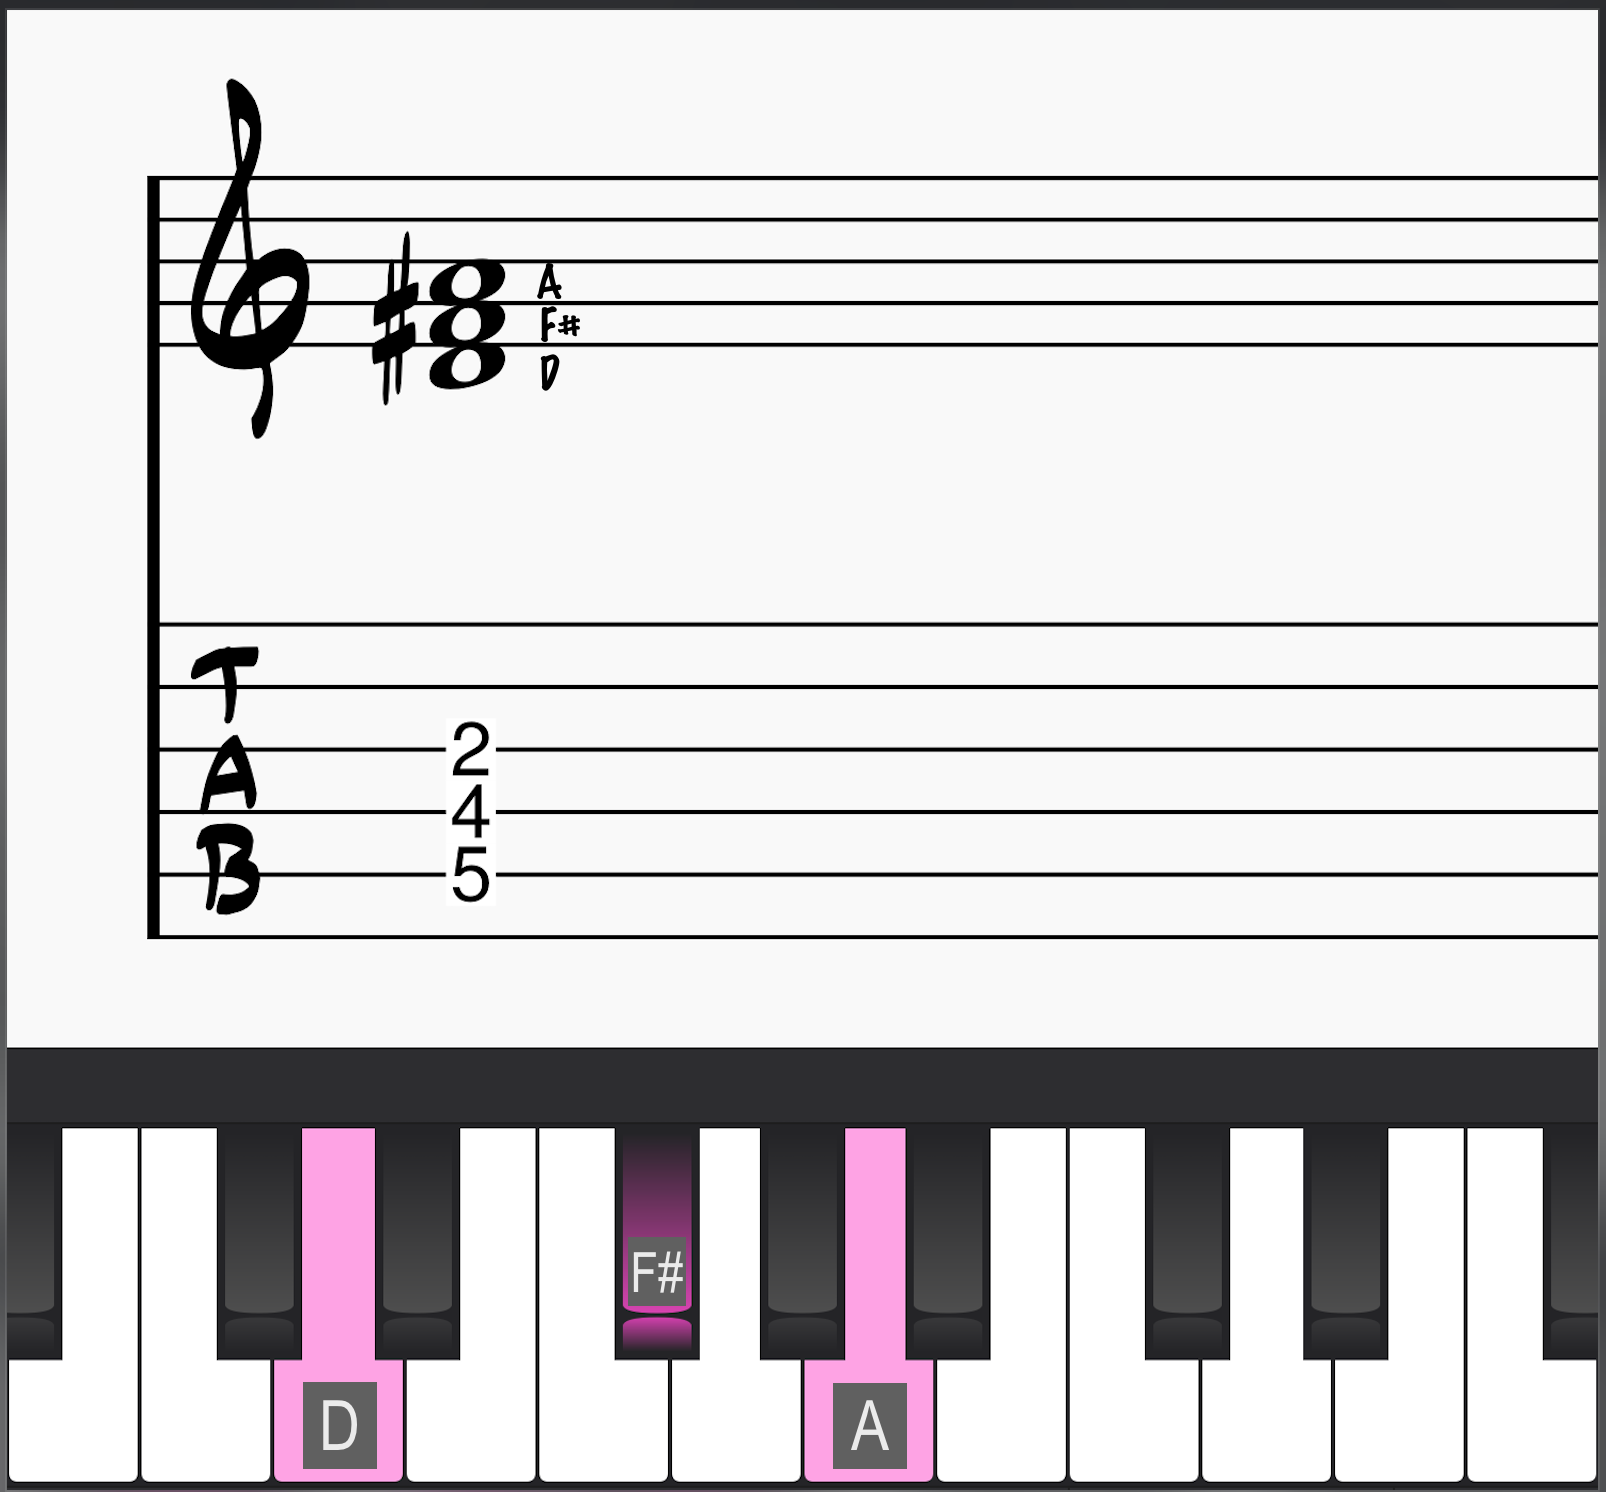 D major triad in root postion